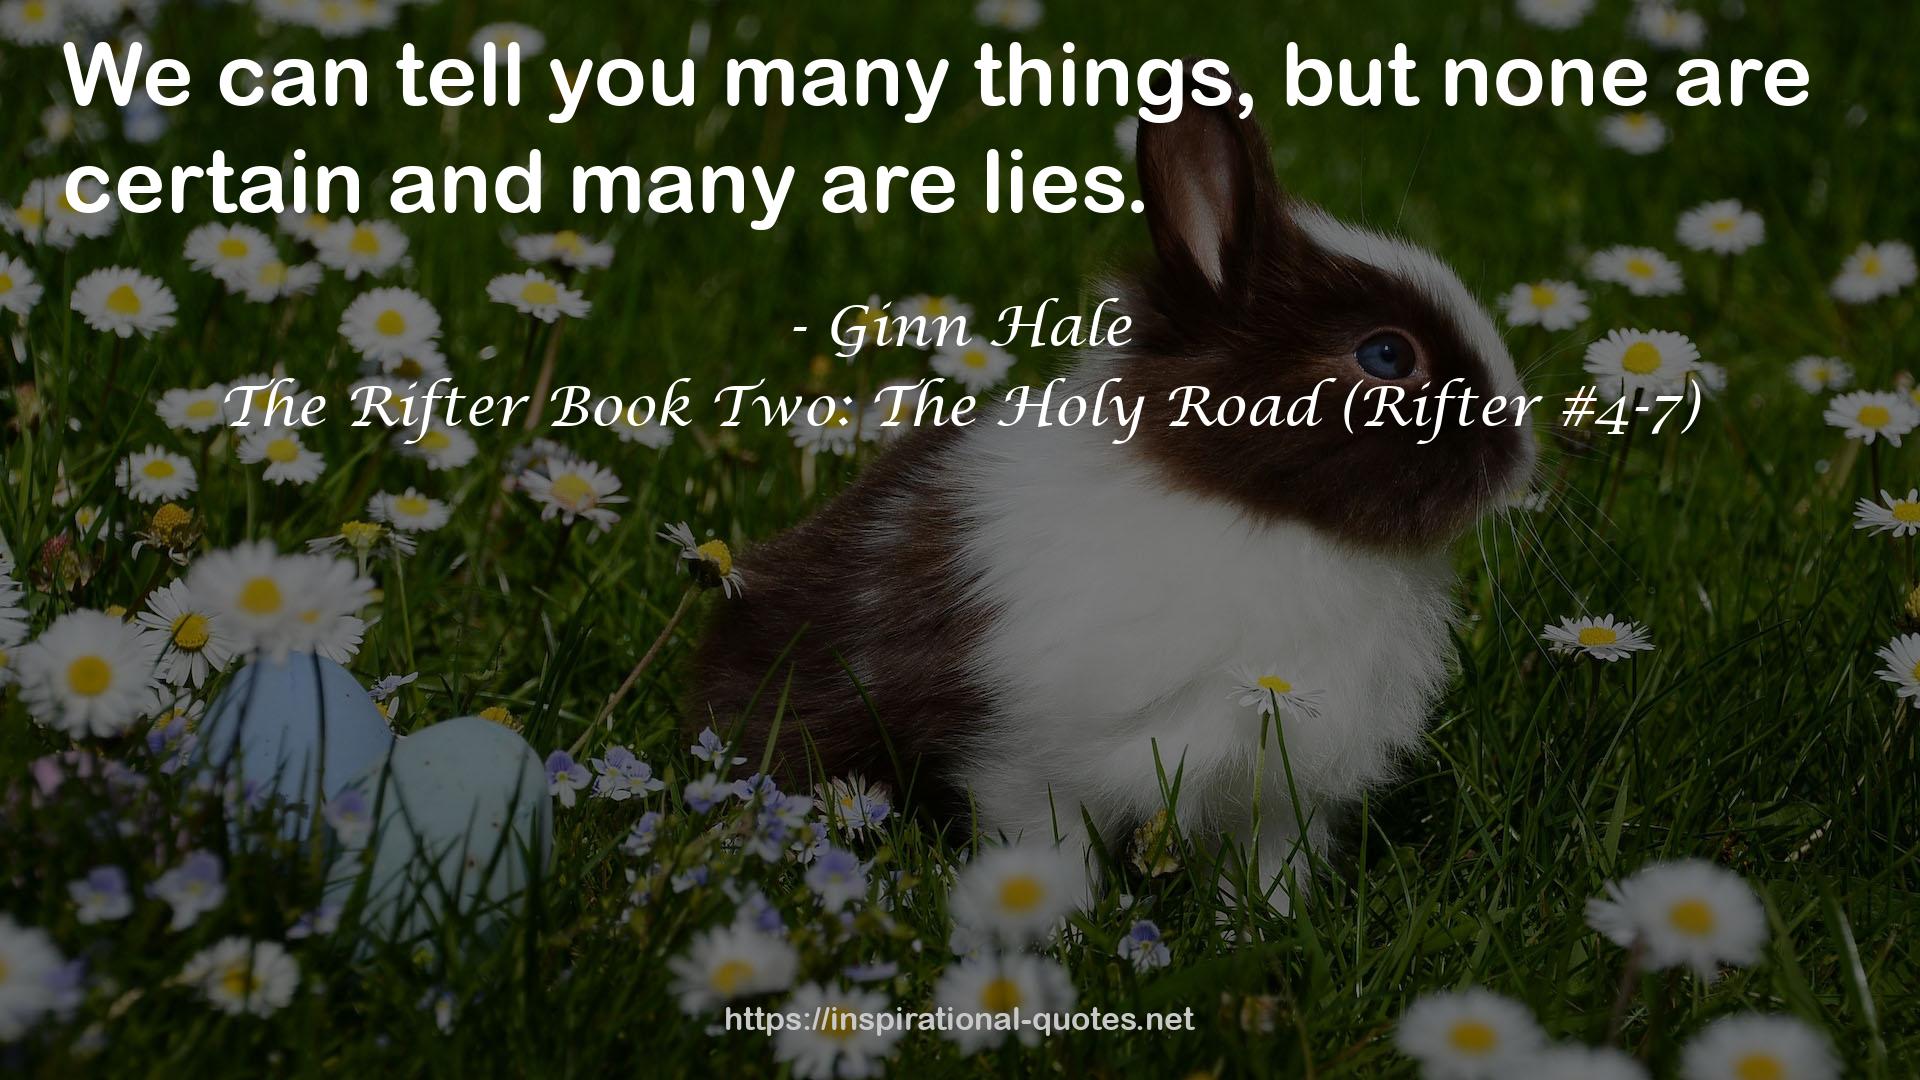 The Rifter Book Two: The Holy Road (Rifter #4-7) QUOTES